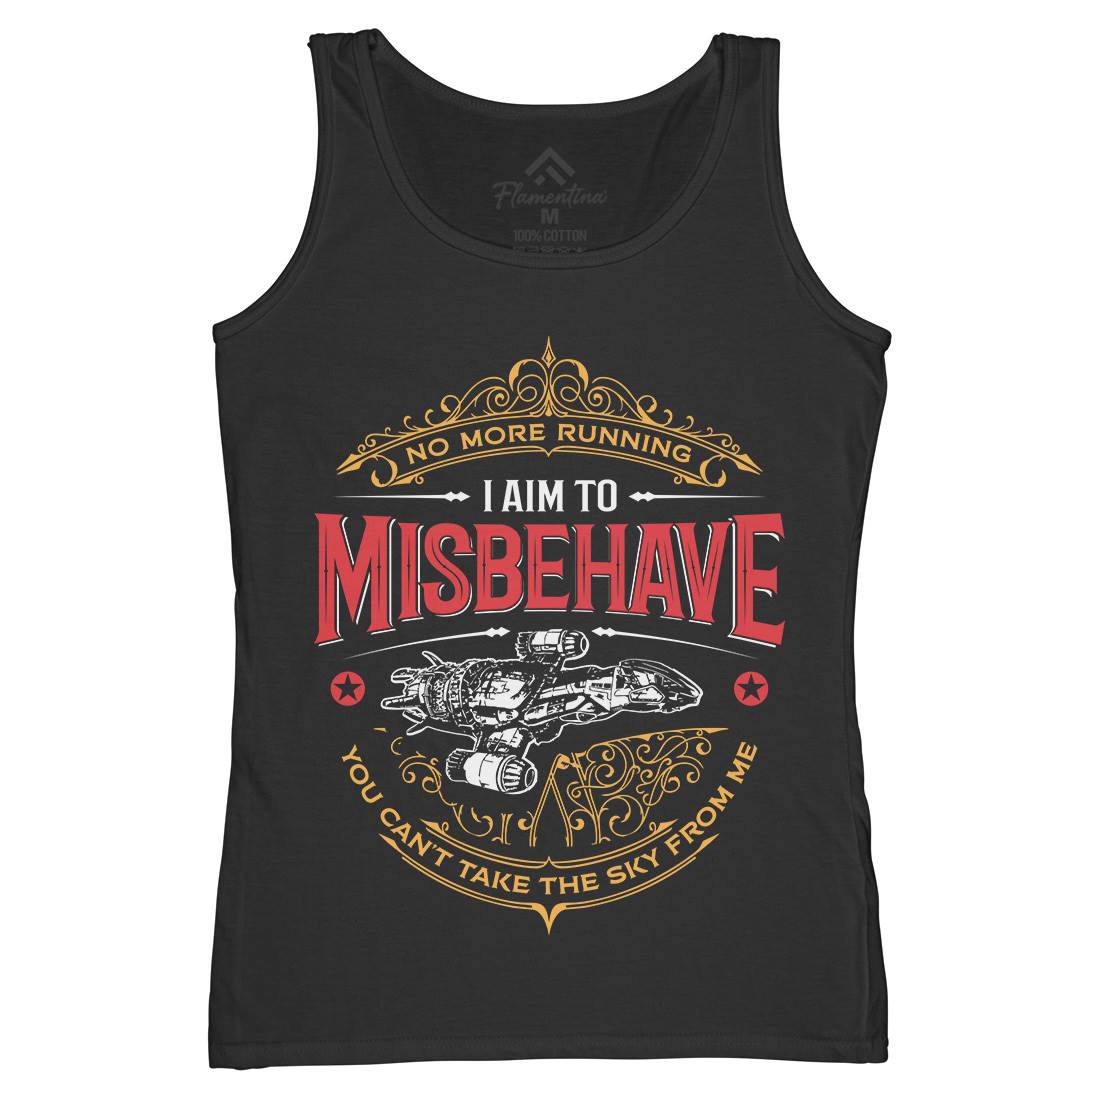 I Aim To Misbehave Womens Organic Tank Top Vest Space D435